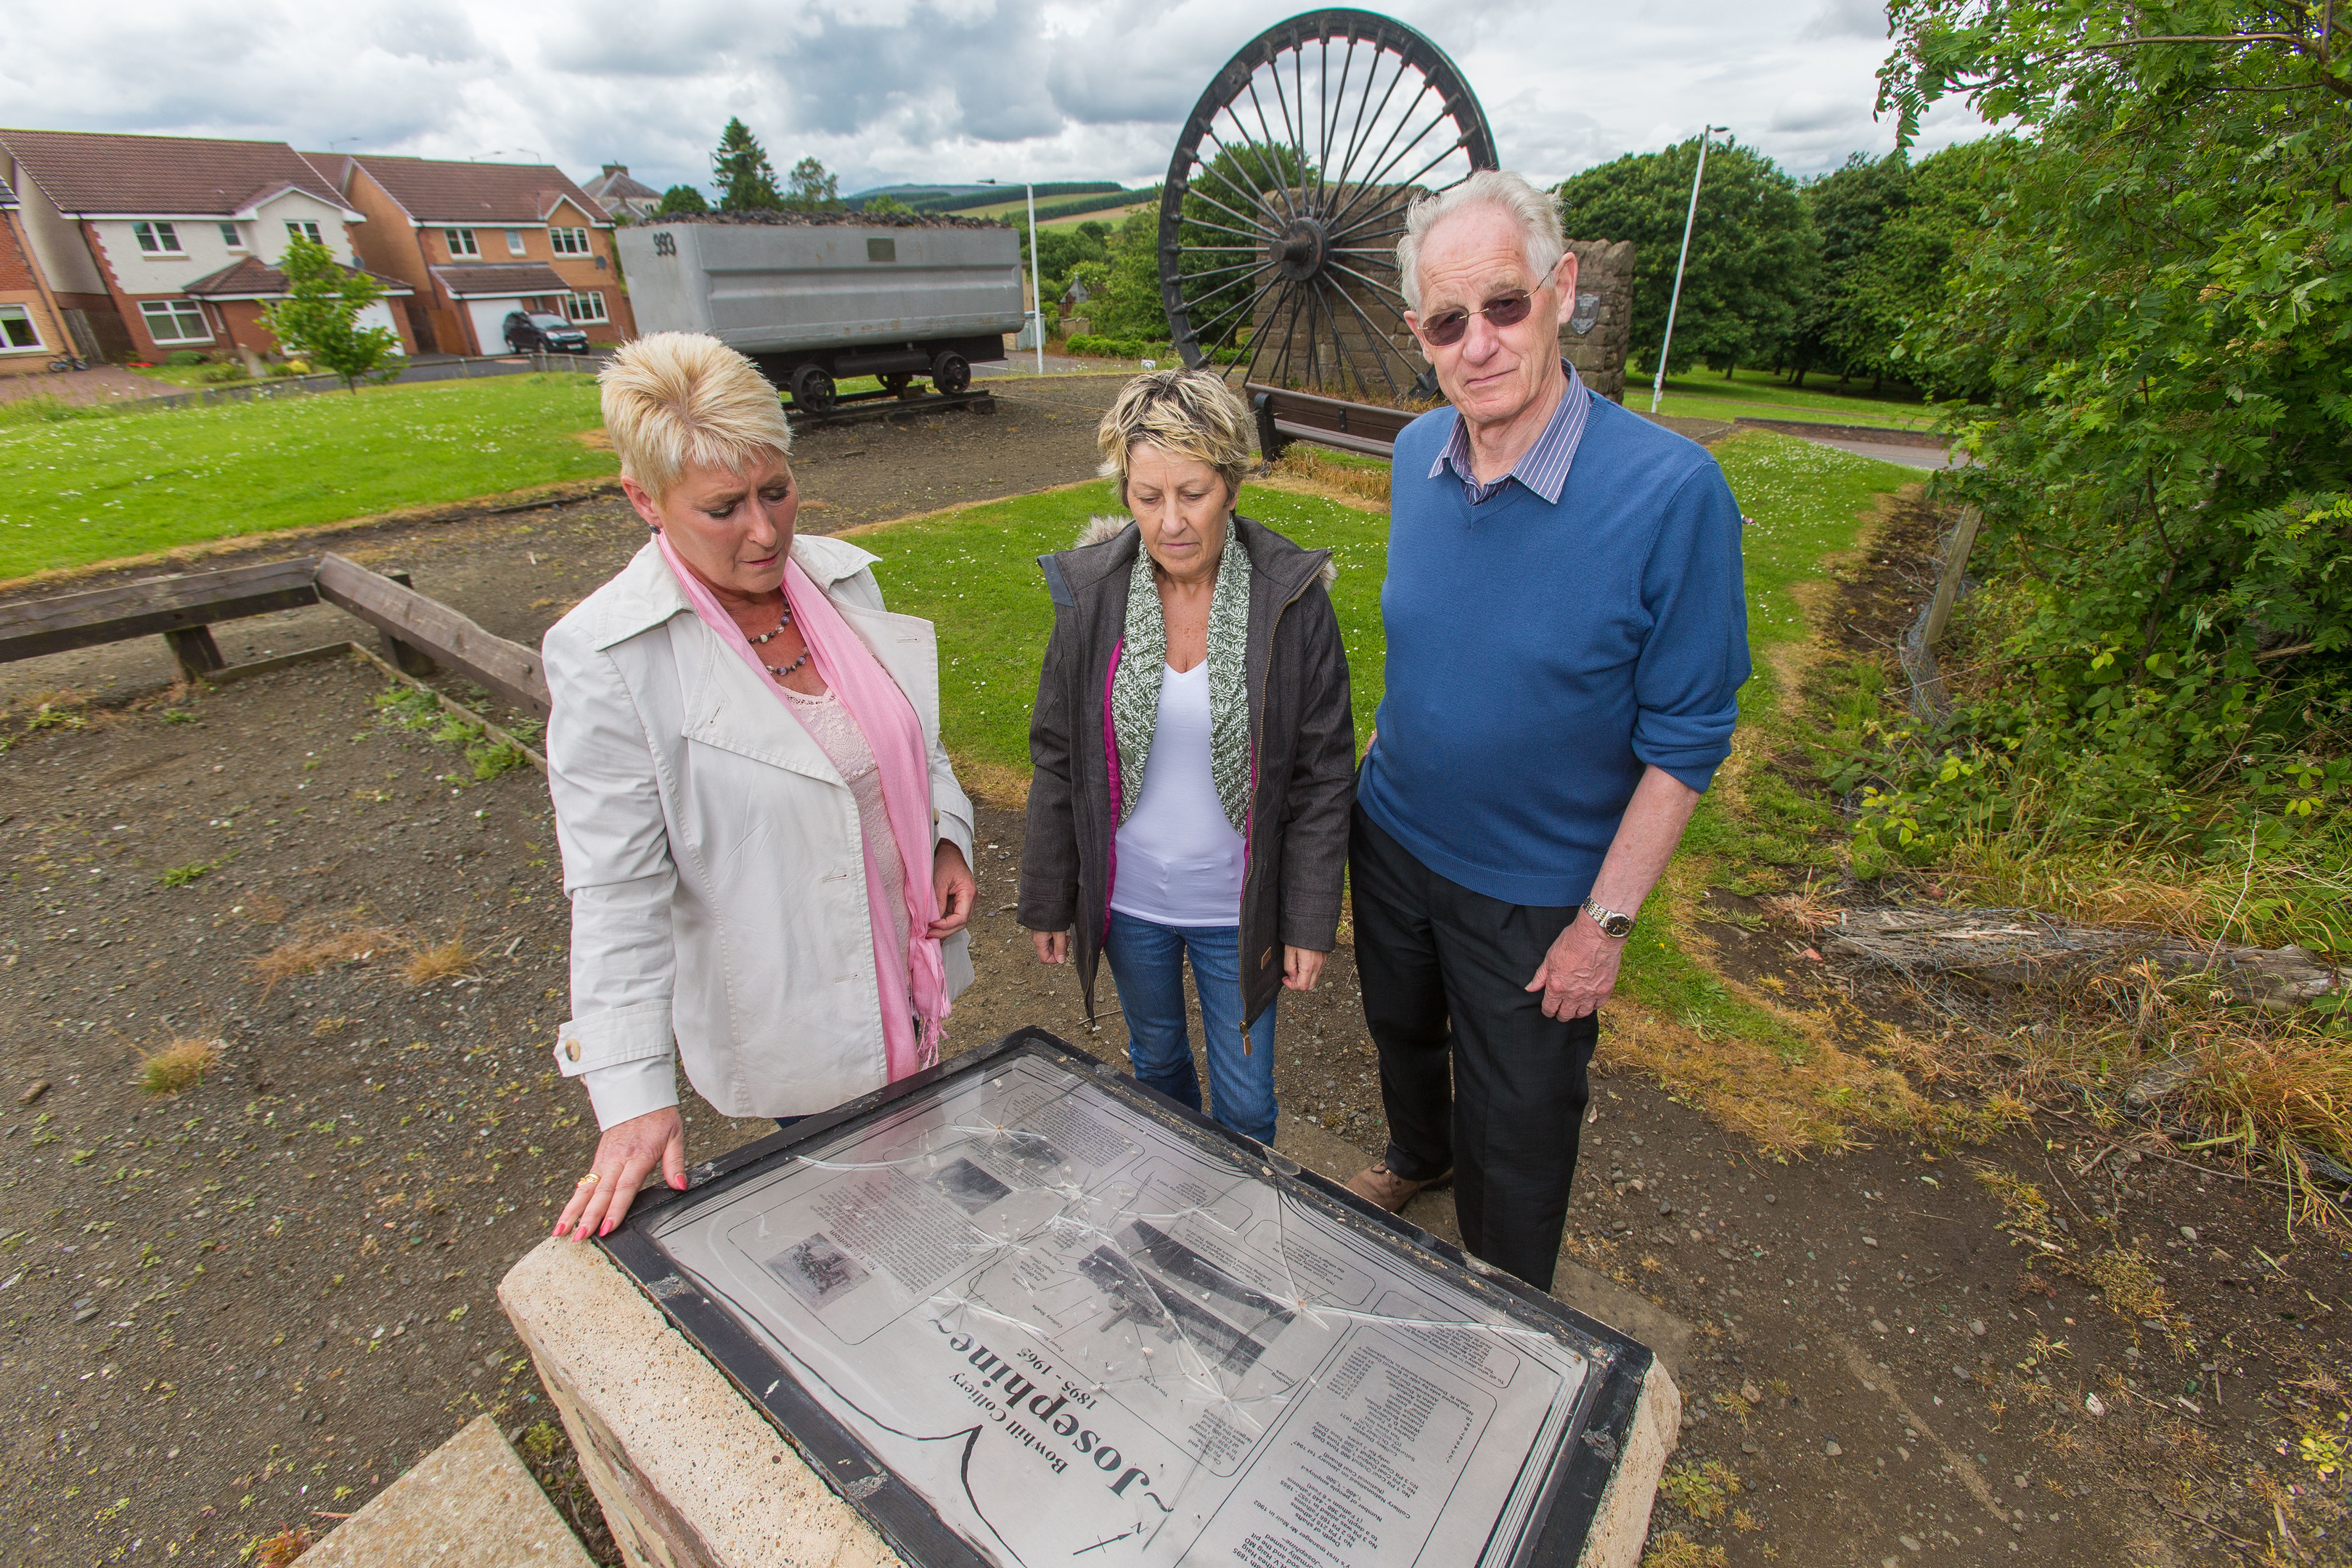 Cllr Rosemary Liewald, Angie Roy of the residents' association and community council secretary David Taylor at the memorial which has been vandalised.